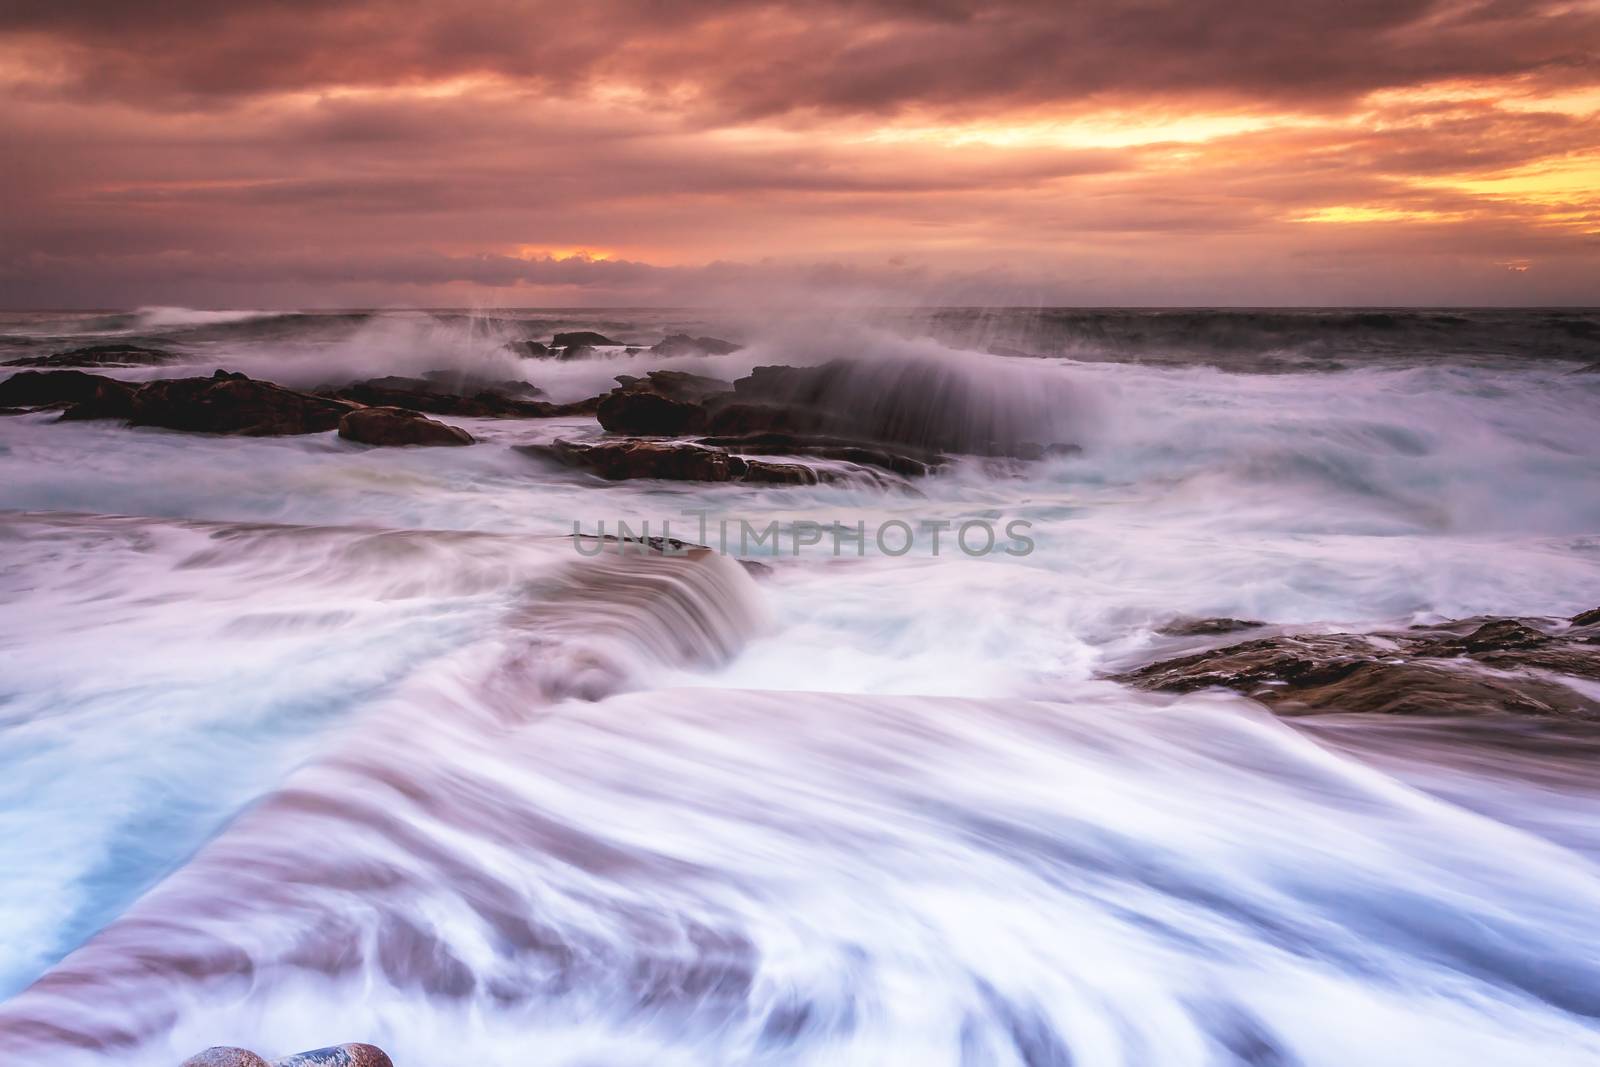 Big swell and large waves flow into the ocean tidal pools just after sunrise the motion of the flows creating interesting movement and texture.